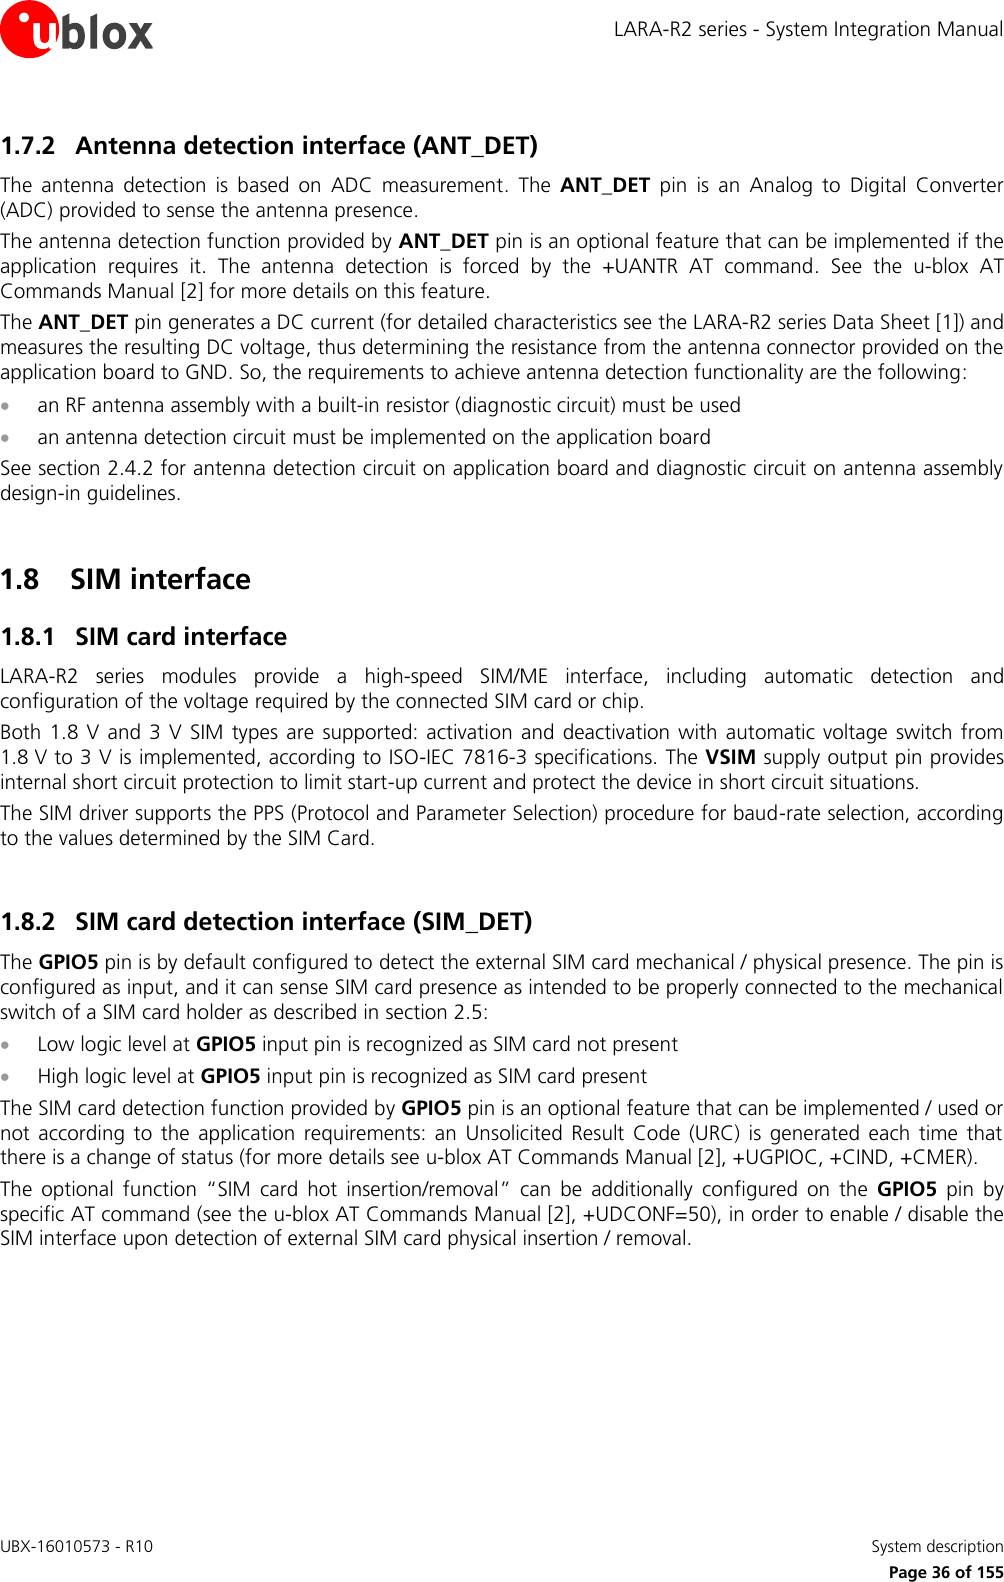 LARA-R2 series - System Integration Manual UBX-16010573 - R10    System description     Page 36 of 155 1.7.2 Antenna detection interface (ANT_DET) The  antenna  detection  is  based  on  ADC  measurement.  The  ANT_DET  pin  is  an  Analog  to  Digital  Converter (ADC) provided to sense the antenna presence. The antenna detection function provided by ANT_DET pin is an optional feature that can be implemented if the application  requires  it.  The  antenna  detection  is  forced  by  the  +UANTR  AT  command.  See  the  u-blox  AT Commands Manual [2] for more details on this feature. The ANT_DET pin generates a DC current (for detailed characteristics see the LARA-R2 series Data Sheet [1]) and measures the resulting DC voltage, thus determining the resistance from the antenna connector provided on the application board to GND. So, the requirements to achieve antenna detection functionality are the following:  an RF antenna assembly with a built-in resistor (diagnostic circuit) must be used  an antenna detection circuit must be implemented on the application board See section 2.4.2 for antenna detection circuit on application board and diagnostic circuit on antenna assembly design-in guidelines.  1.8 SIM interface 1.8.1 SIM card interface LARA-R2  series  modules  provide  a  high-speed  SIM/ME  interface,  including  automatic  detection  and configuration of the voltage required by the connected SIM card or chip. Both 1.8  V  and 3  V SIM  types  are  supported:  activation  and deactivation with  automatic  voltage switch  from 1.8 V to 3 V is implemented, according to ISO-IEC 7816-3 specifications. The VSIM supply output pin provides internal short circuit protection to limit start-up current and protect the device in short circuit situations. The SIM driver supports the PPS (Protocol and Parameter Selection) procedure for baud-rate selection, according to the values determined by the SIM Card.  1.8.2 SIM card detection interface (SIM_DET) The GPIO5 pin is by default configured to detect the external SIM card mechanical / physical presence. The pin is configured as input, and it can sense SIM card presence as intended to be properly connected to the mechanical switch of a SIM card holder as described in section 2.5:  Low logic level at GPIO5 input pin is recognized as SIM card not present  High logic level at GPIO5 input pin is recognized as SIM card present The SIM card detection function provided by GPIO5 pin is an optional feature that can be implemented / used or not  according  to  the  application  requirements:  an  Unsolicited  Result  Code  (URC)  is  generated  each  time  that there is a change of status (for more details see u-blox AT Commands Manual [2], +UGPIOC, +CIND, +CMER). The  optional  function  “SIM  card  hot  insertion/removal”  can  be  additionally  configured  on  the  GPIO5  pin  by specific AT command (see the u-blox AT Commands Manual [2], +UDCONF=50), in order to enable / disable the SIM interface upon detection of external SIM card physical insertion / removal.   